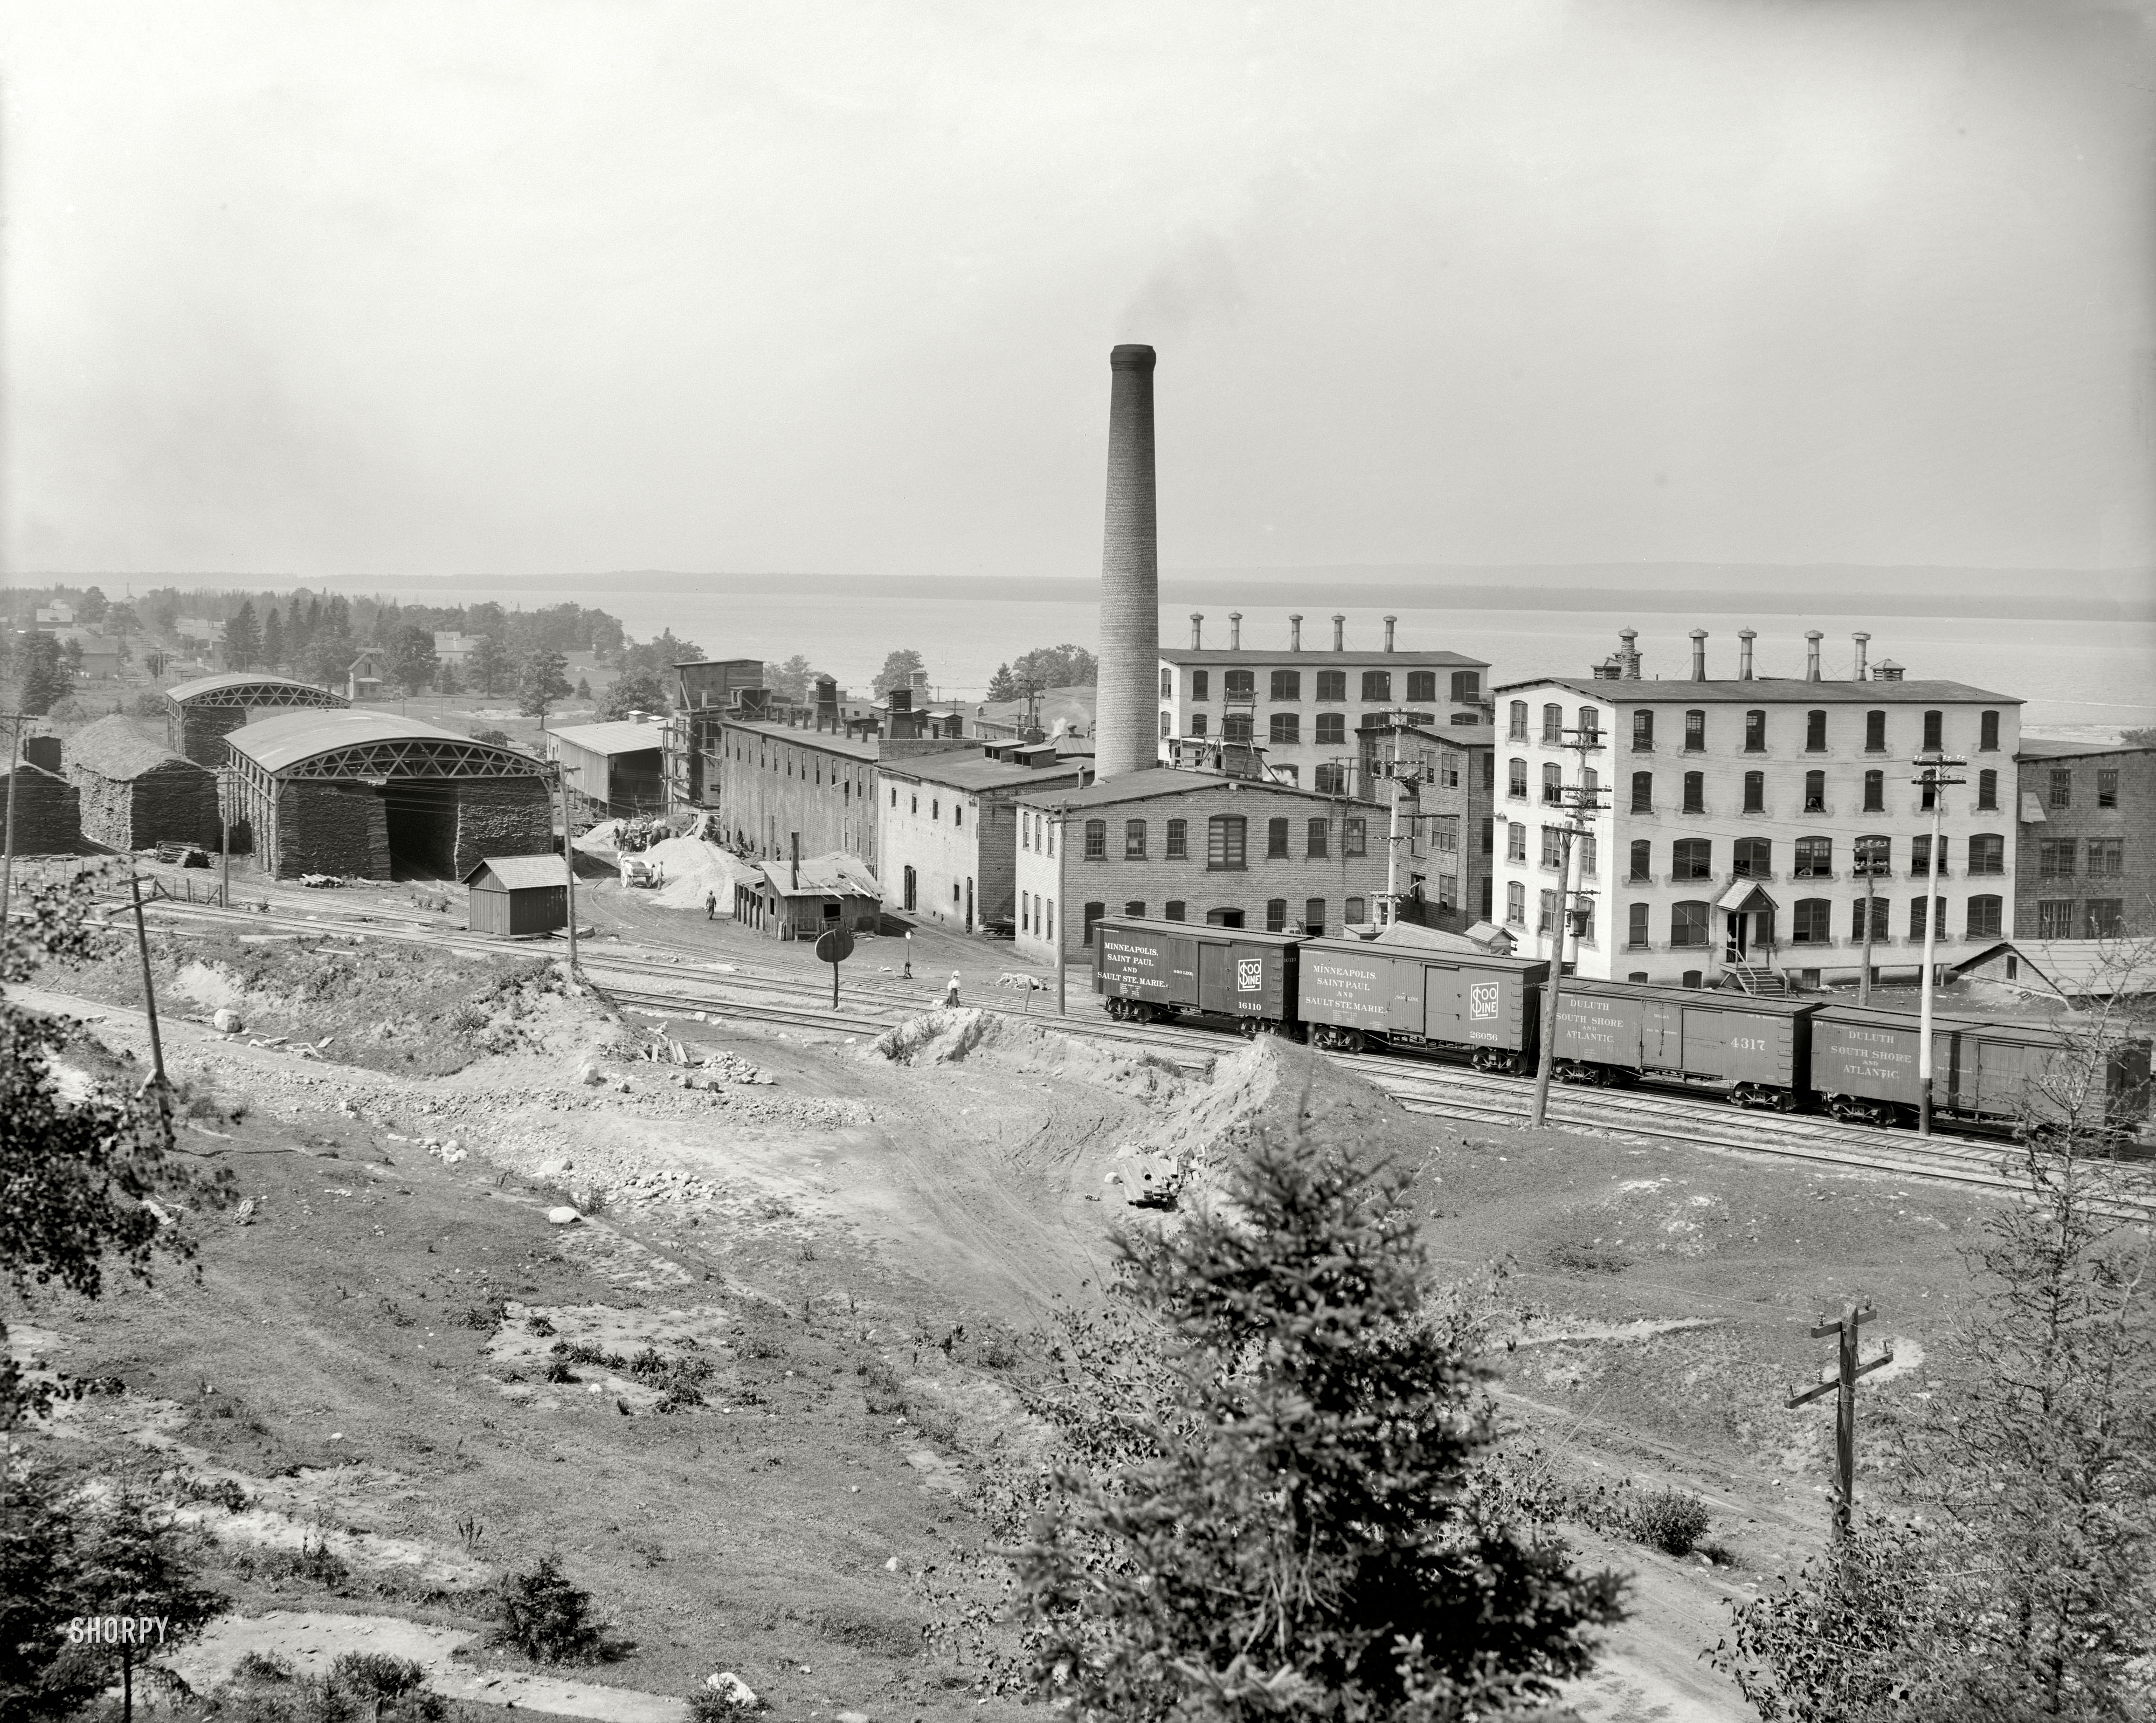 Sault Sainte Marie, Michigan, circa 1908. "Algonquin Tannery." Served by the Soo Line, as well as the Duluth, South Shore & Atlantic. View full size.